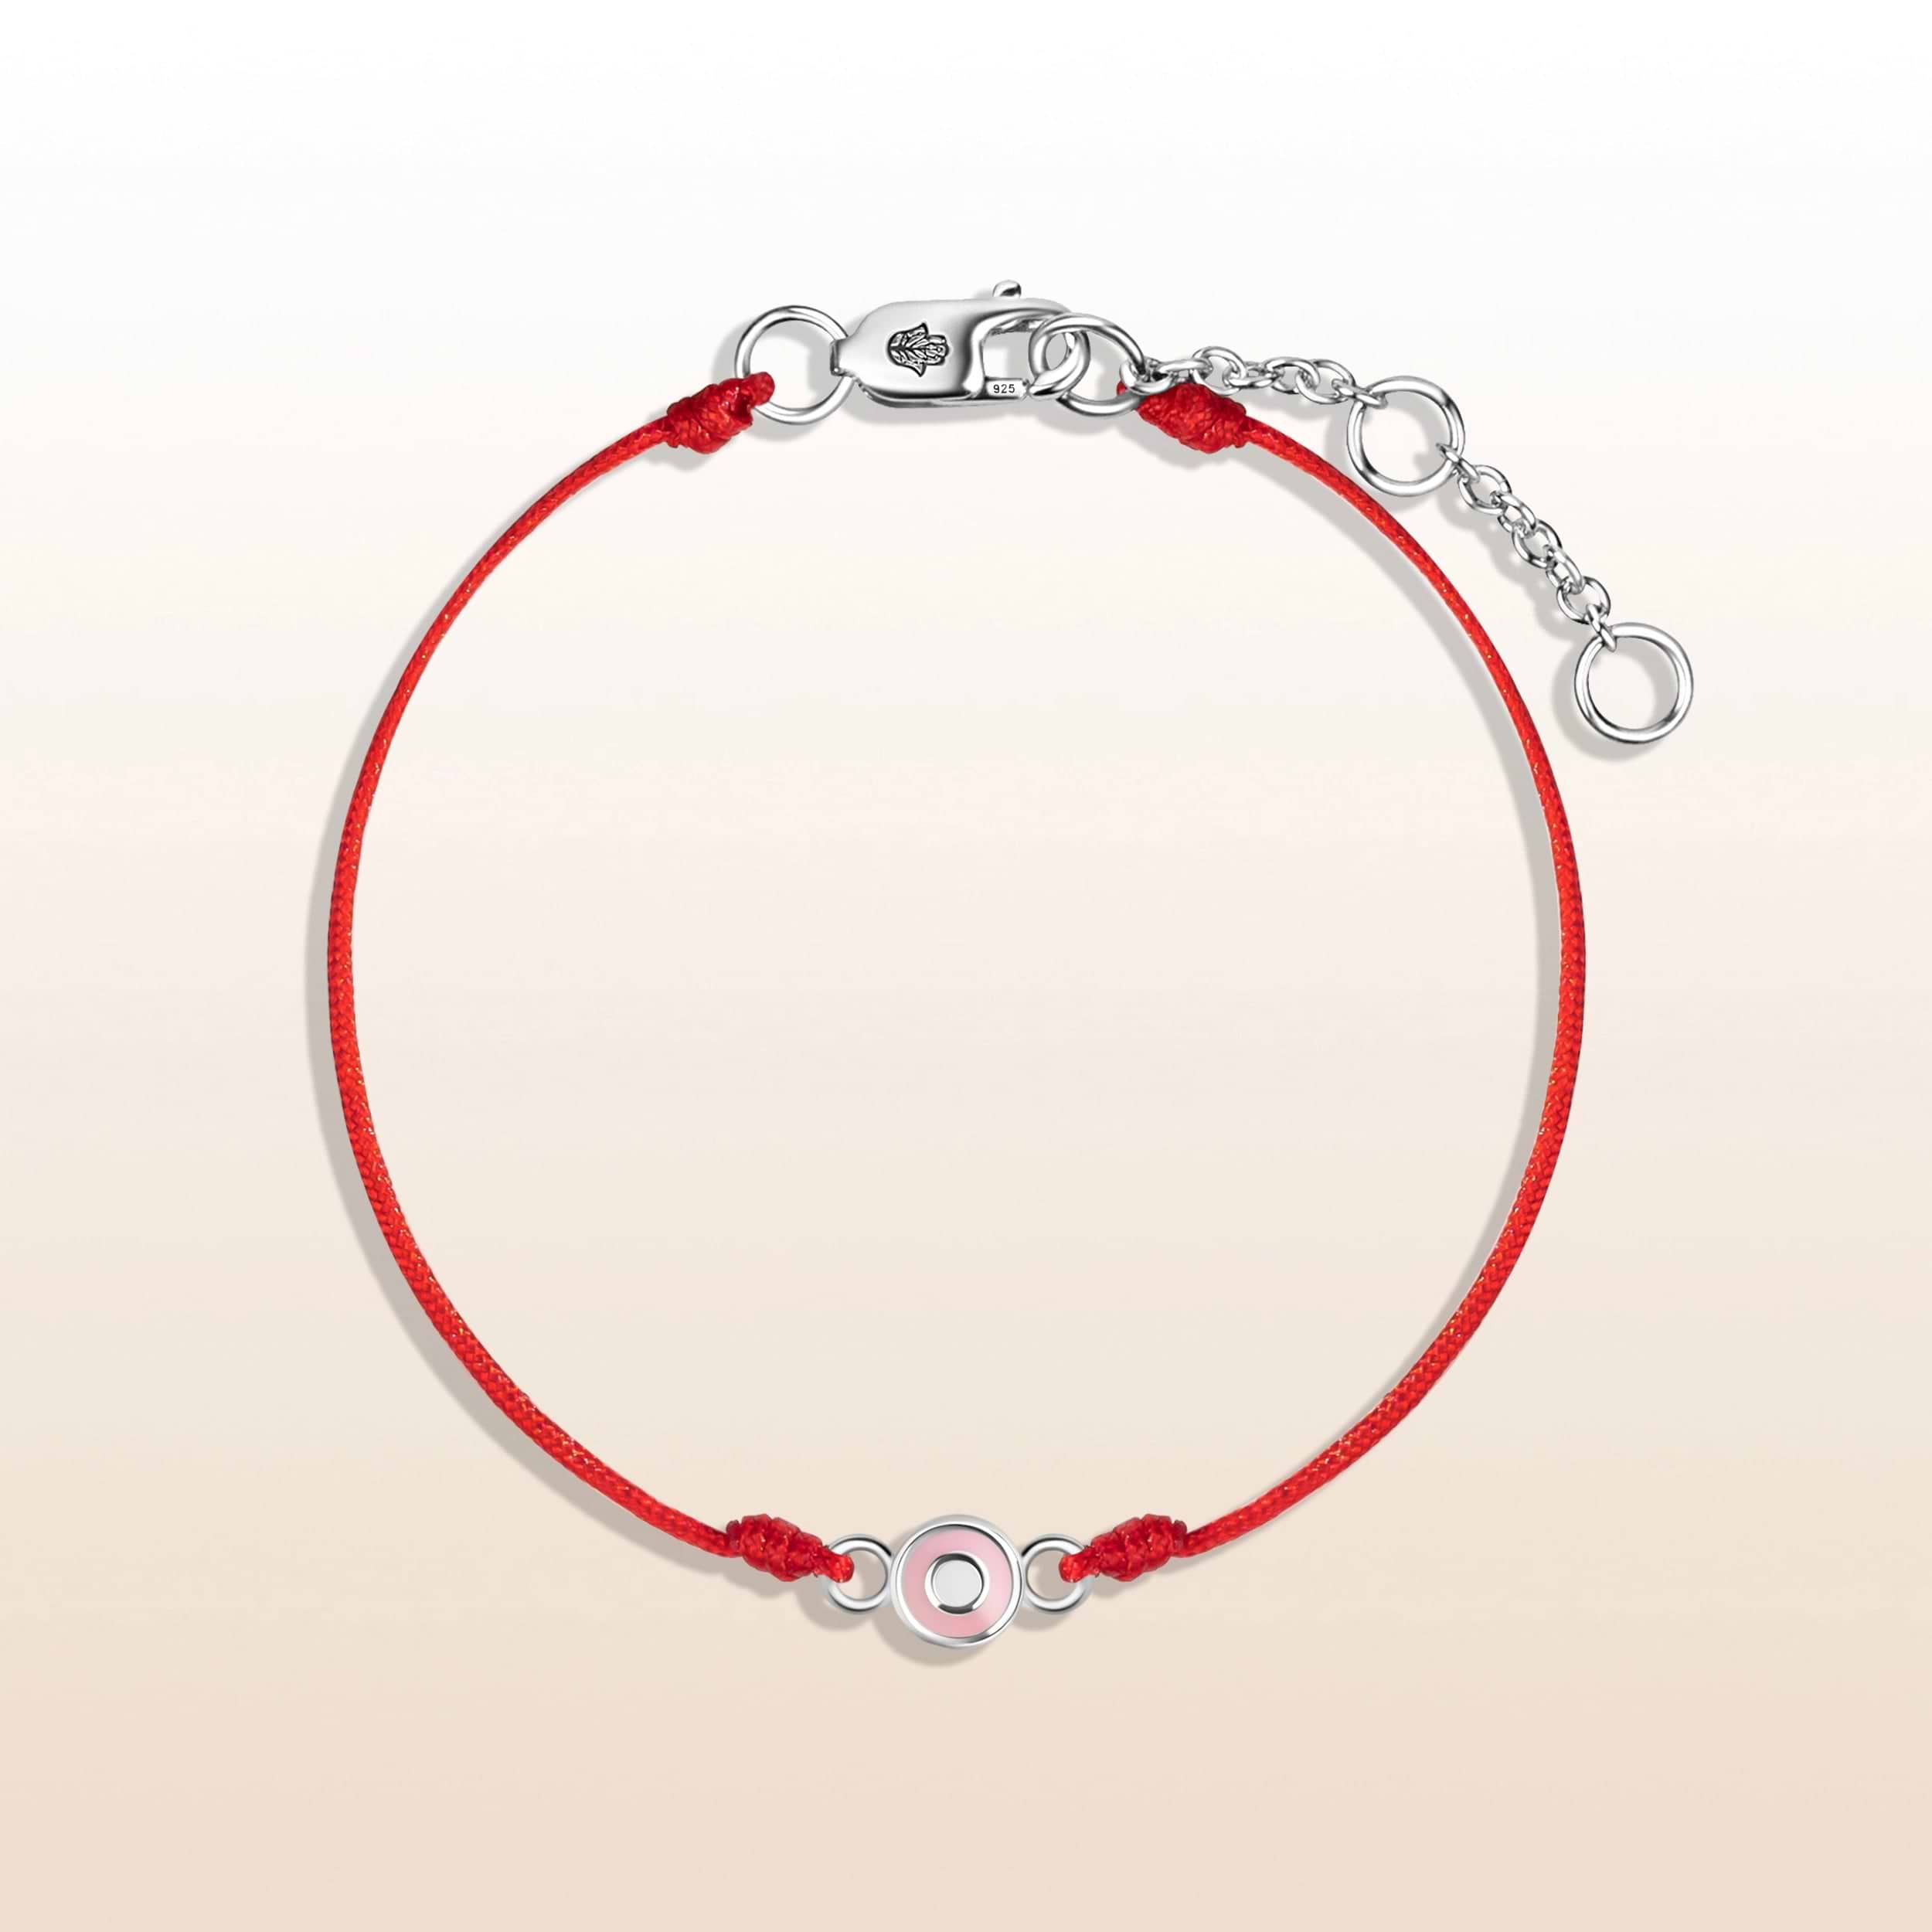  "Protected by Love - Baby Girl Silver Evil Eye Red Bracelet" has the perfect frequencies for your little girl's heart to flourish and grow. A symbol of care and protection, this enchanting Evil Eye charm is sure to add joyful energy to her everyday activities.